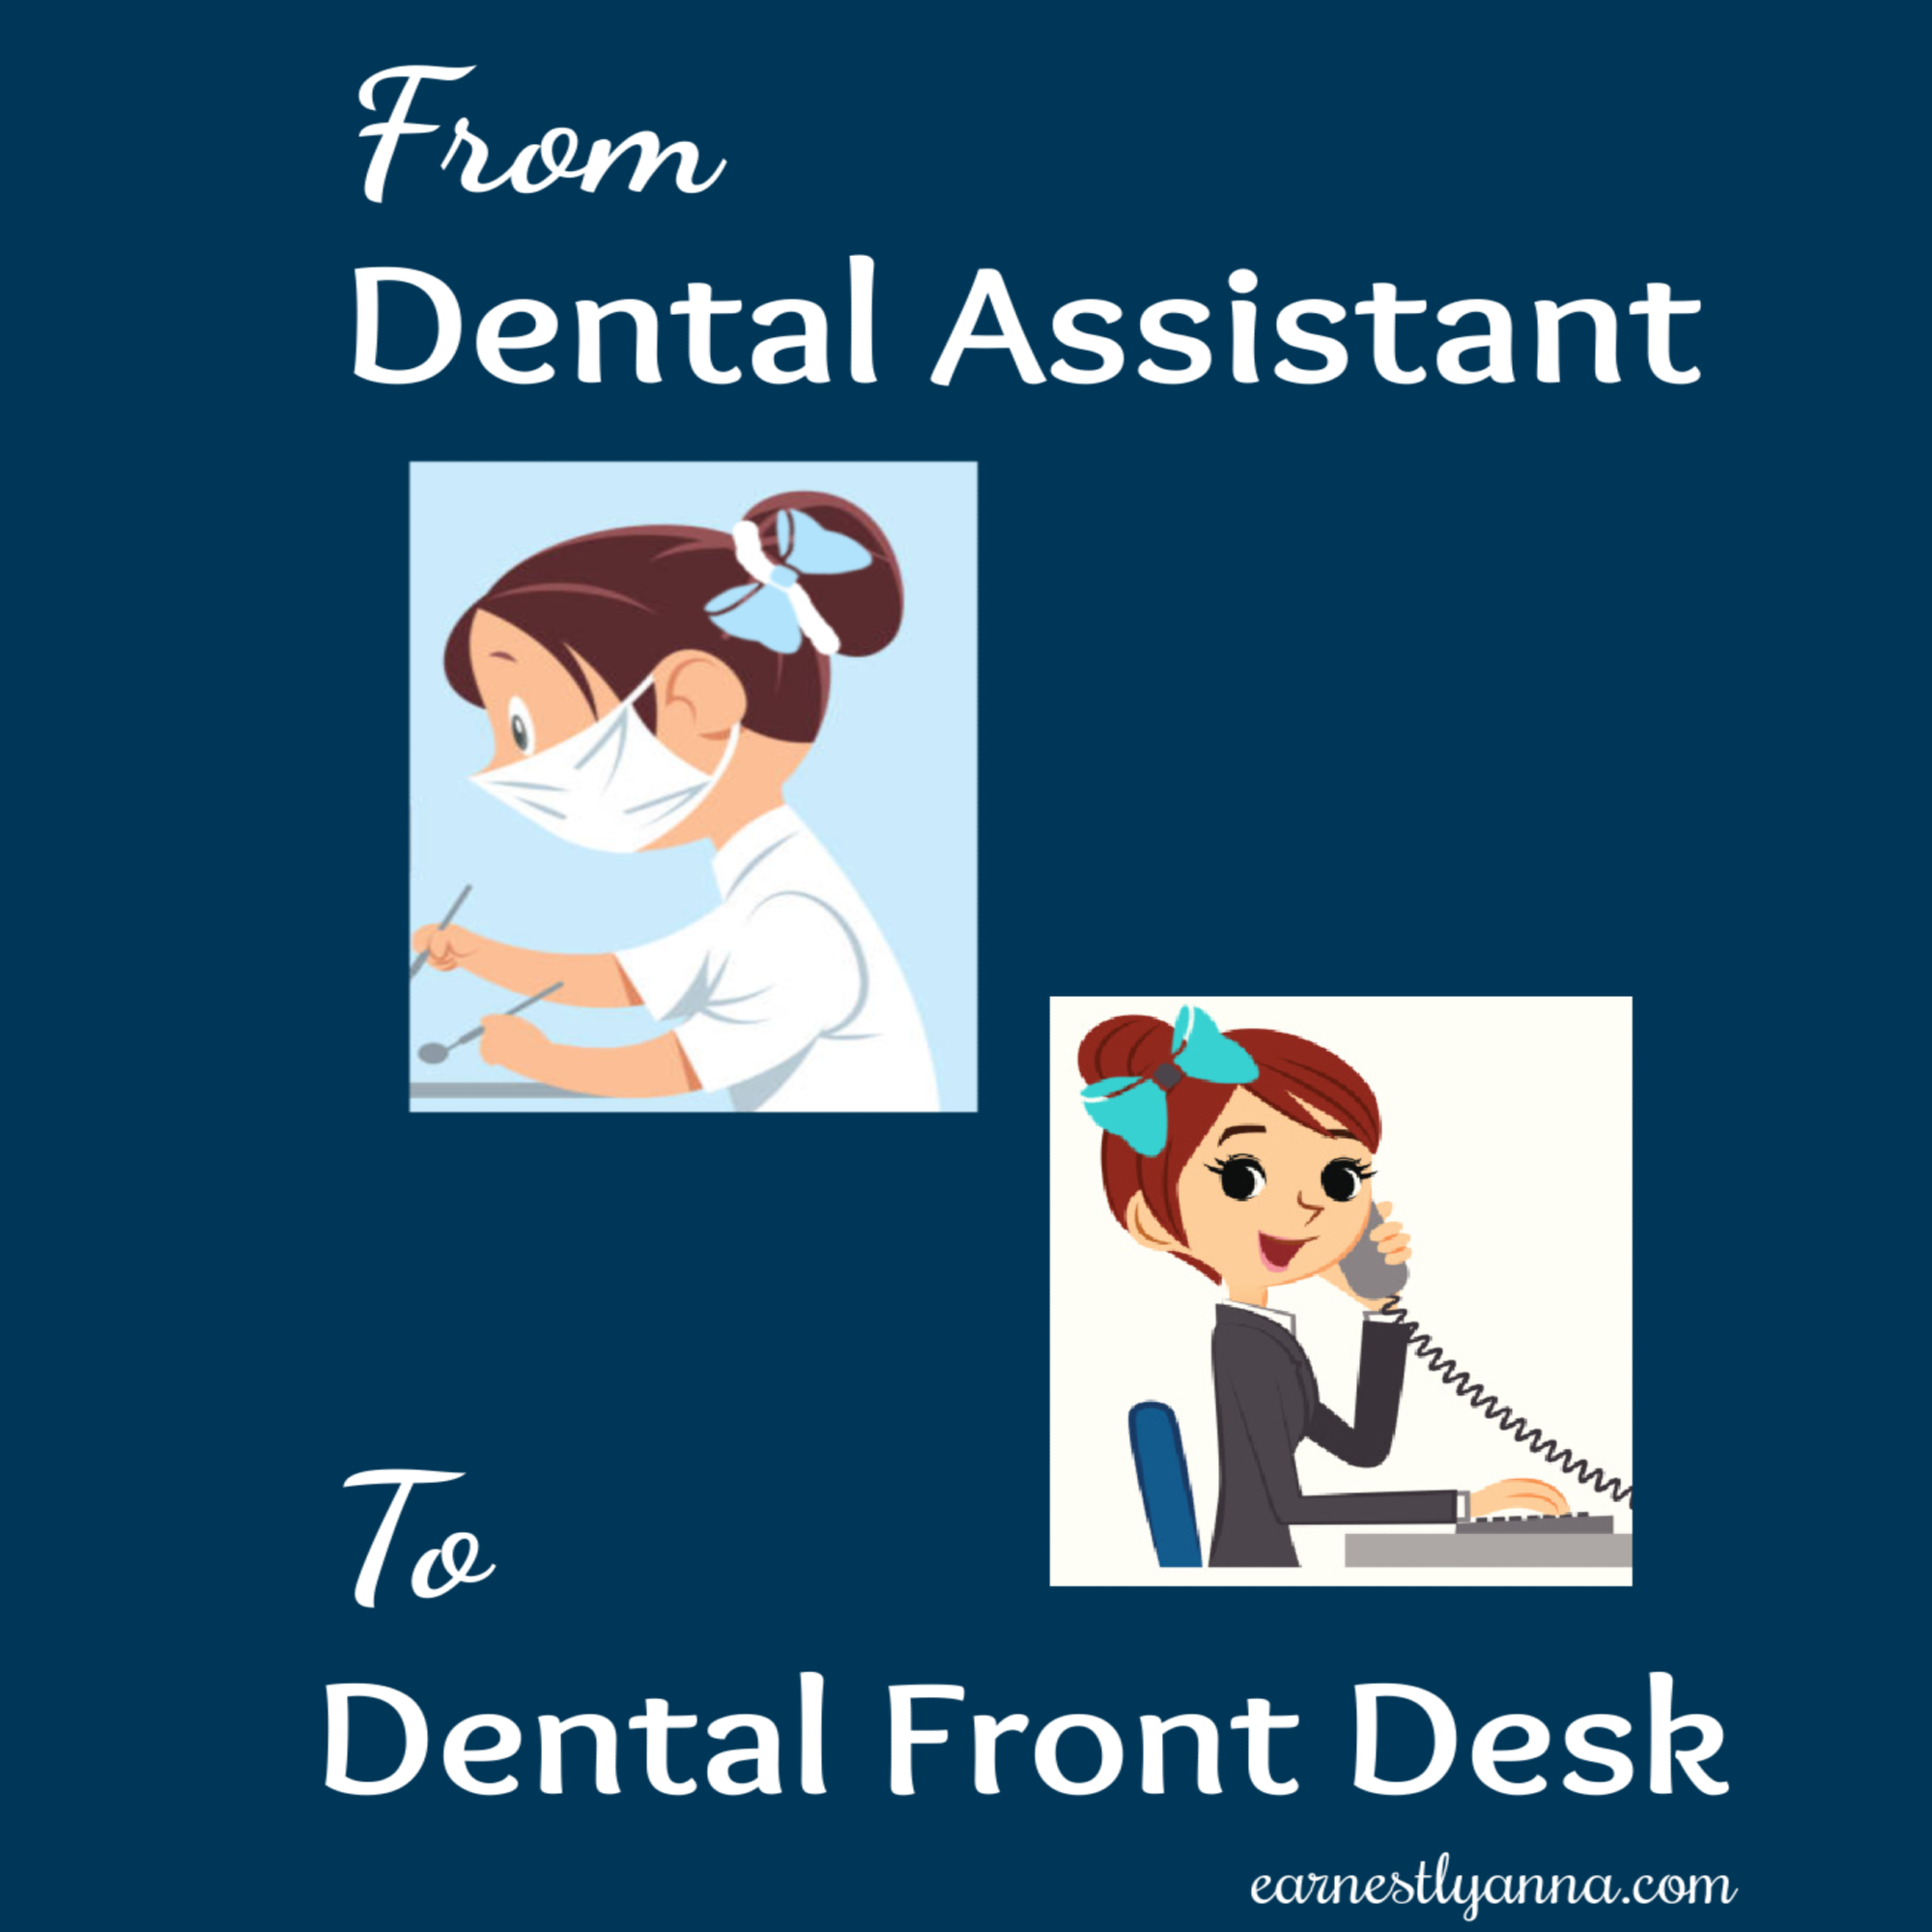 How-to-go-from-Dental-Assistant-to-Dental-Front-Desk